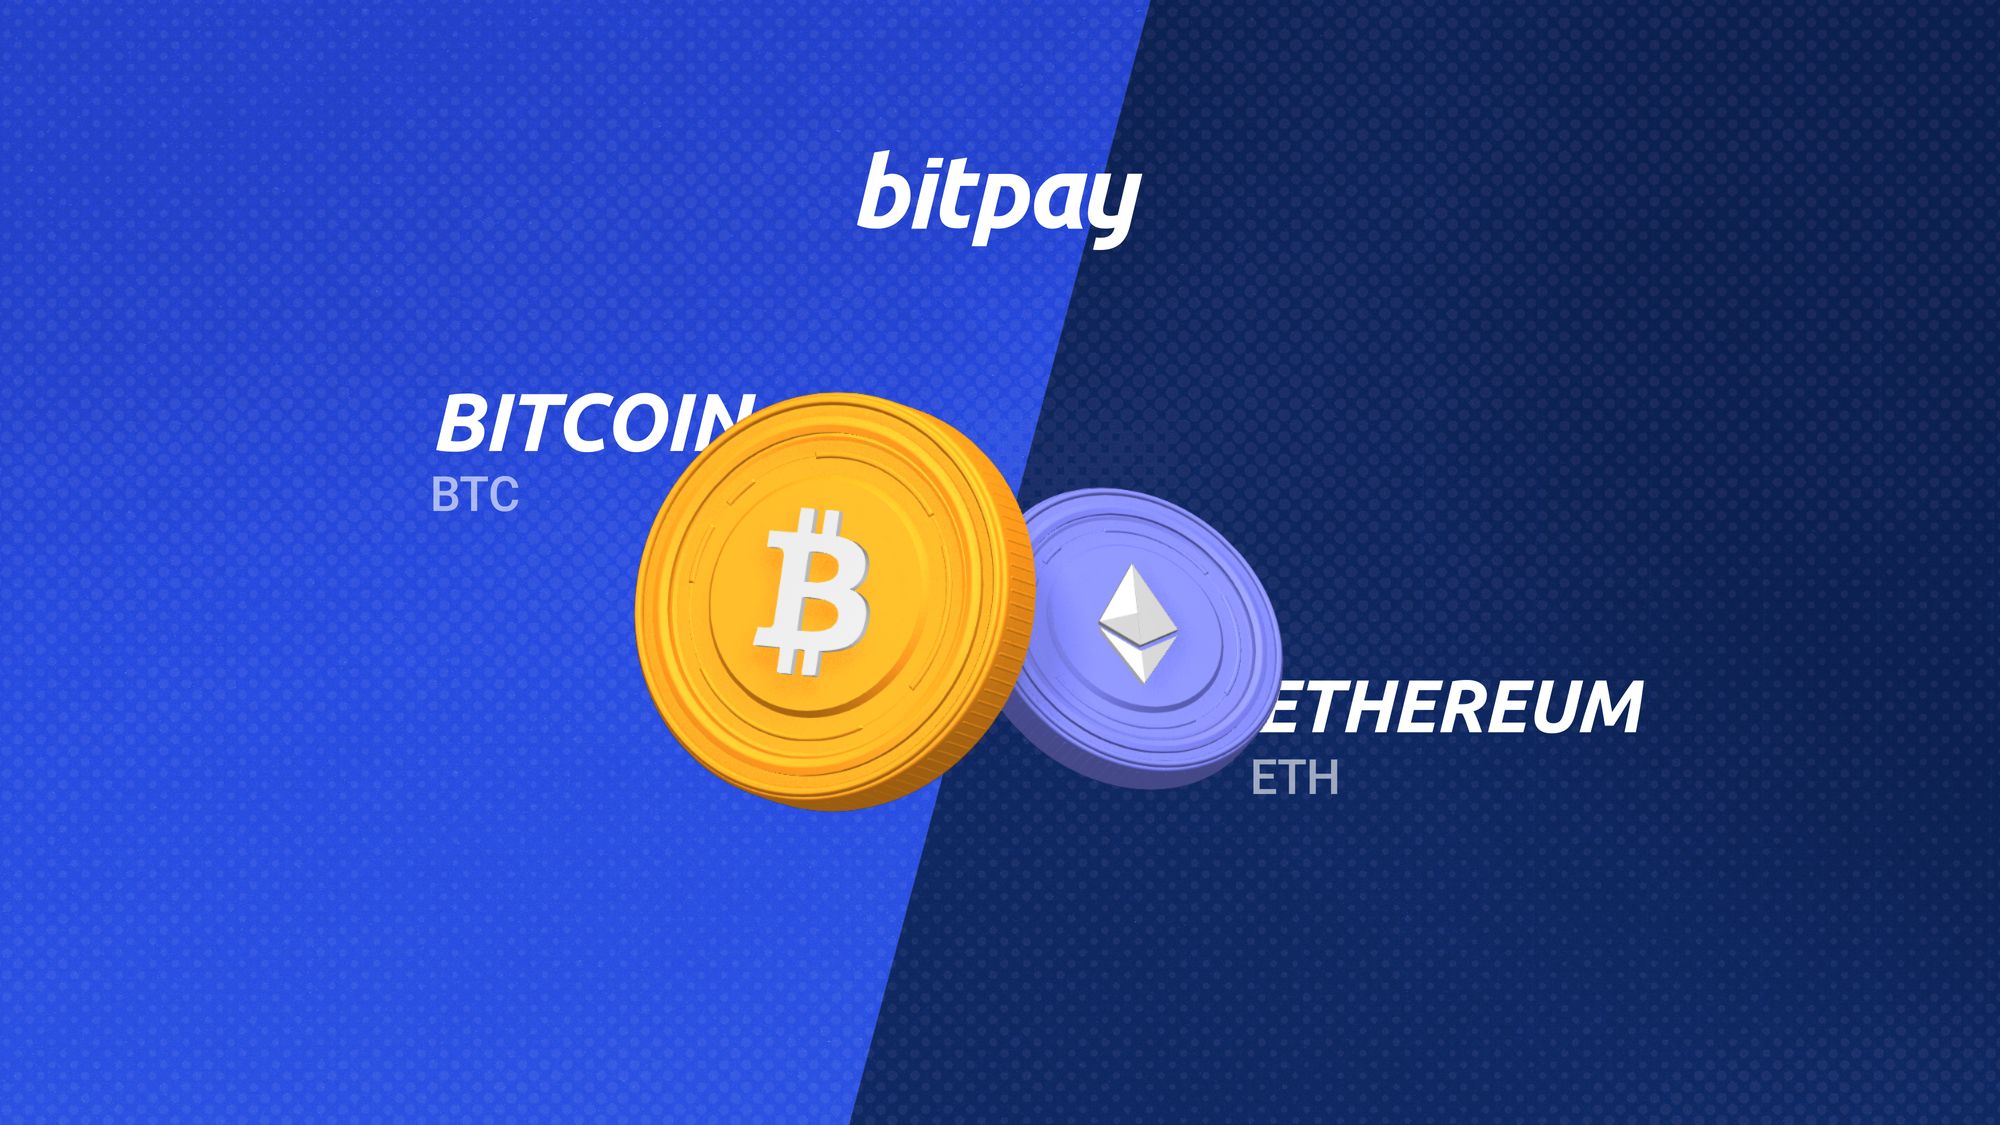 Bitcoin vs Ethereum - A Comparative Analysis between BTC and ETH